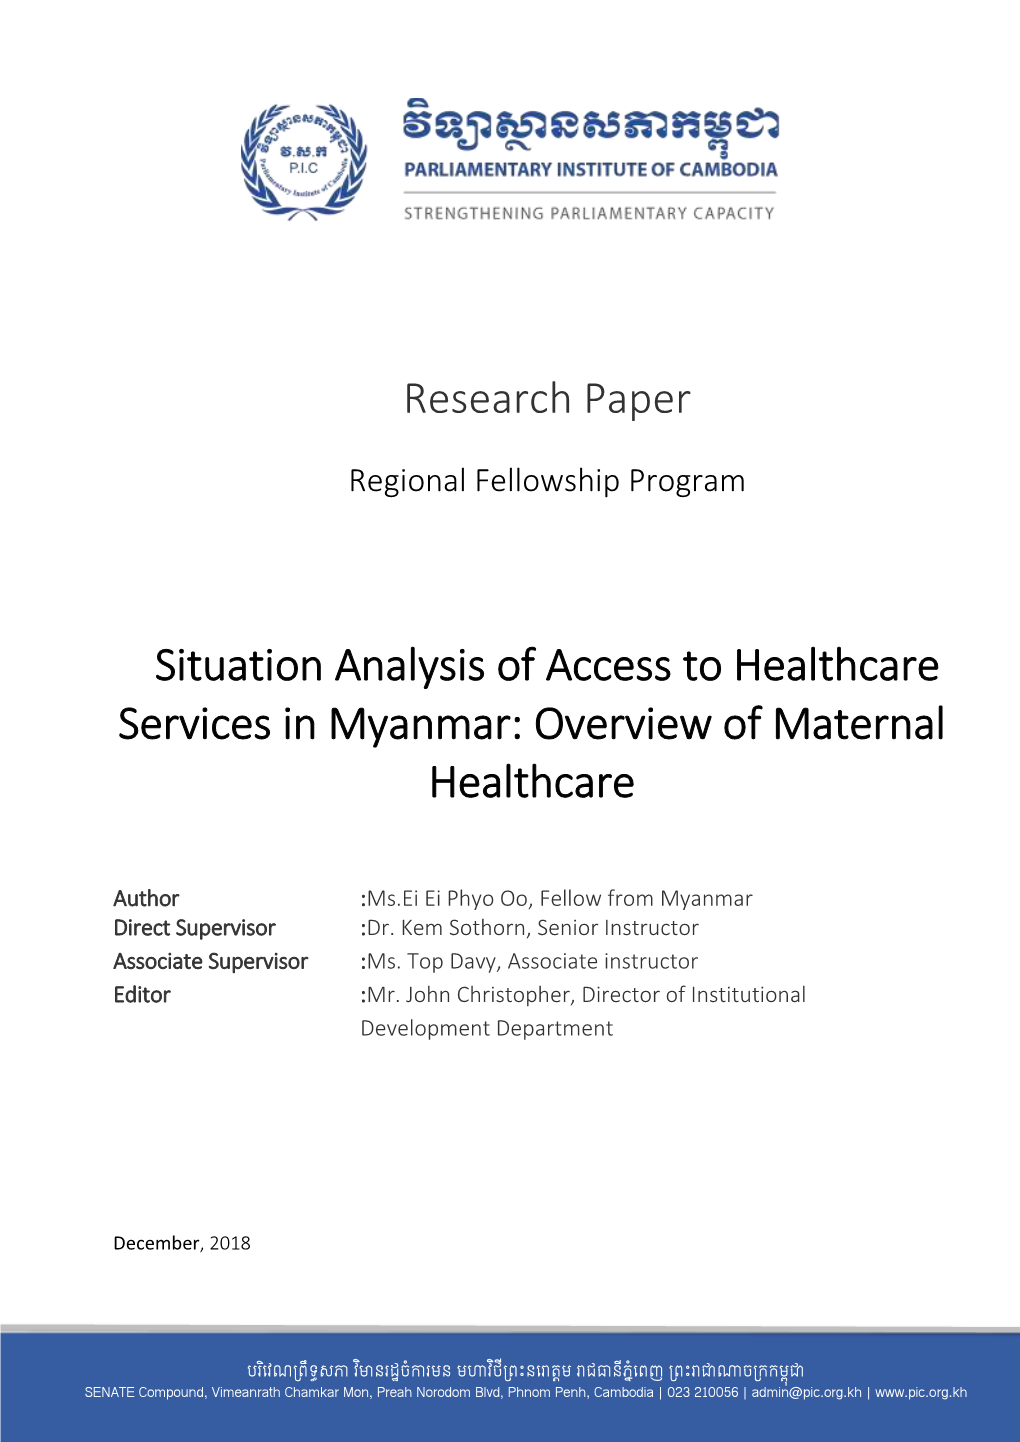 Situation Analysis of Access to Healthcare Services in Myanmar: Overview of Maternal Healthcare